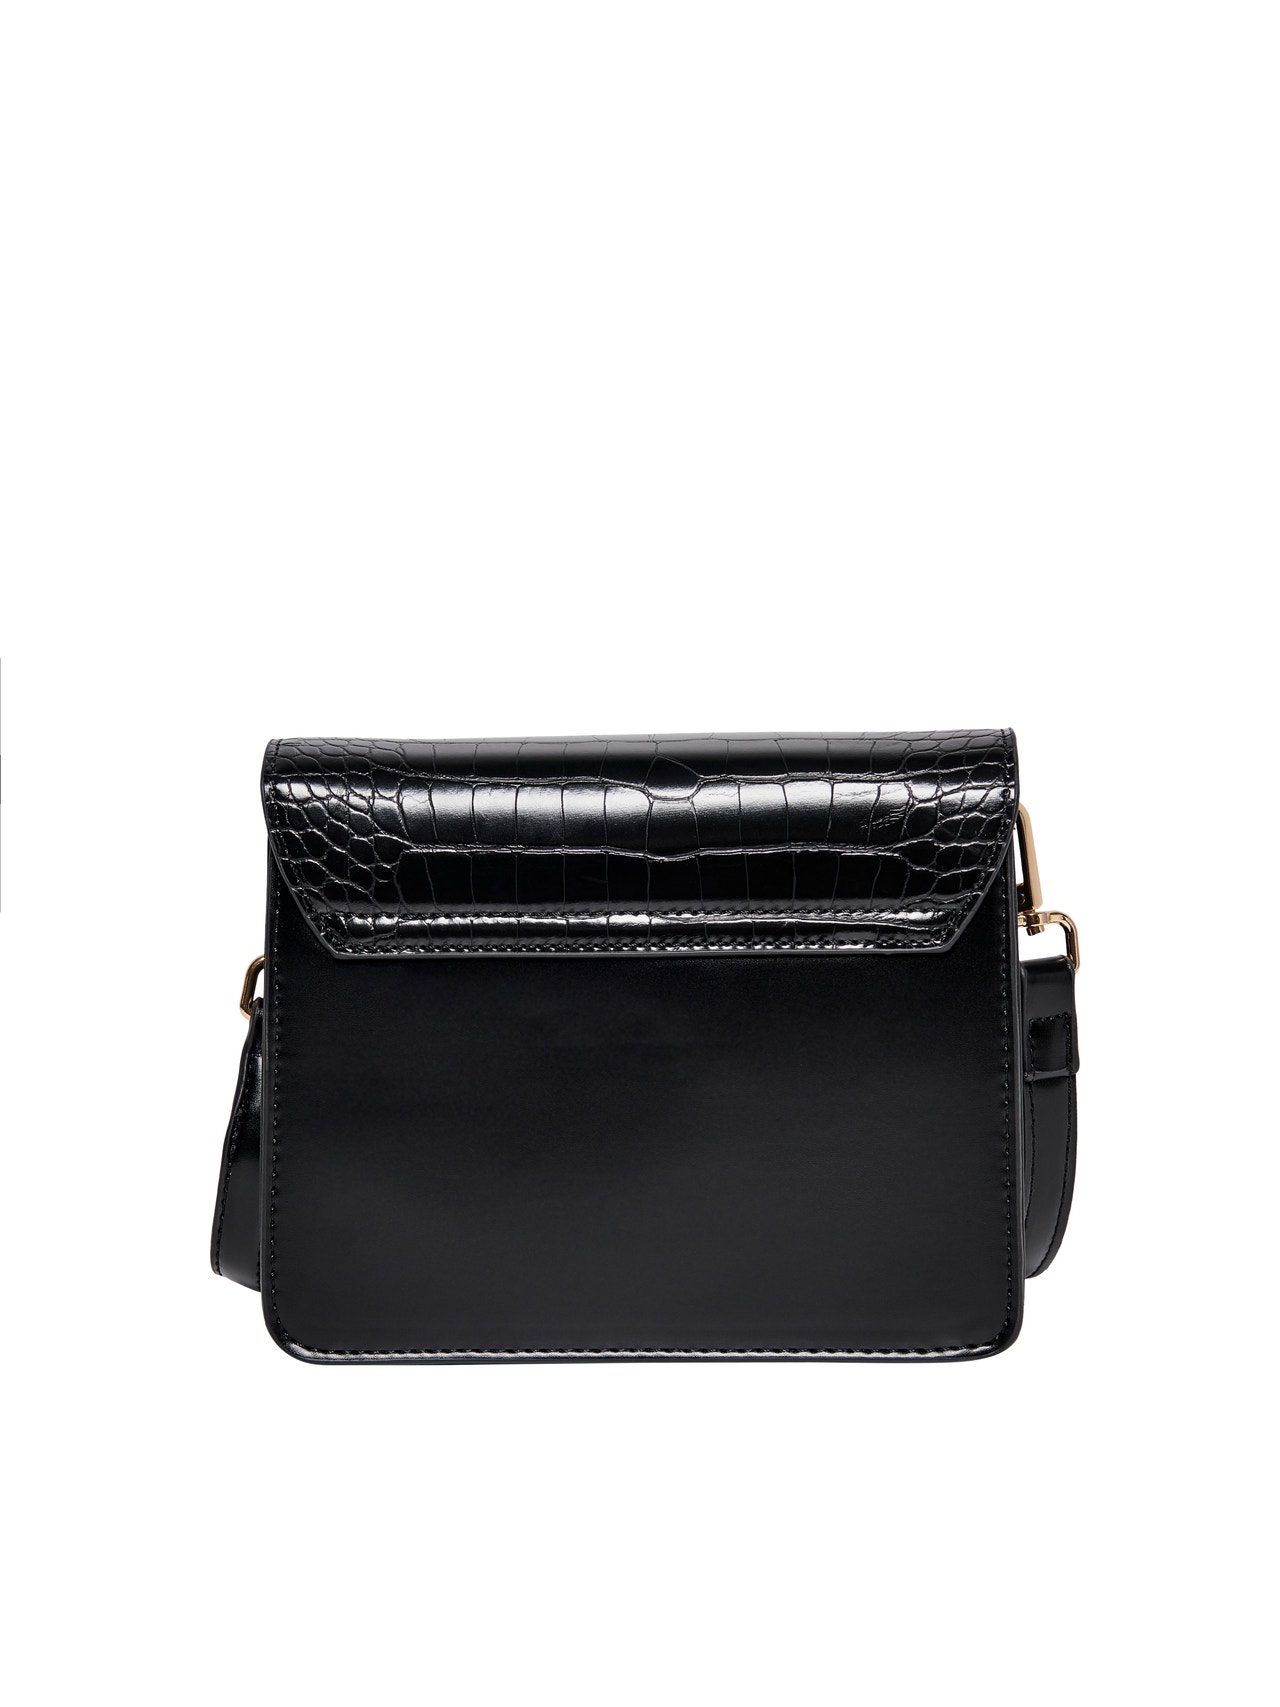 ONLY Leather look Crossbody Bag -Black - 15197105